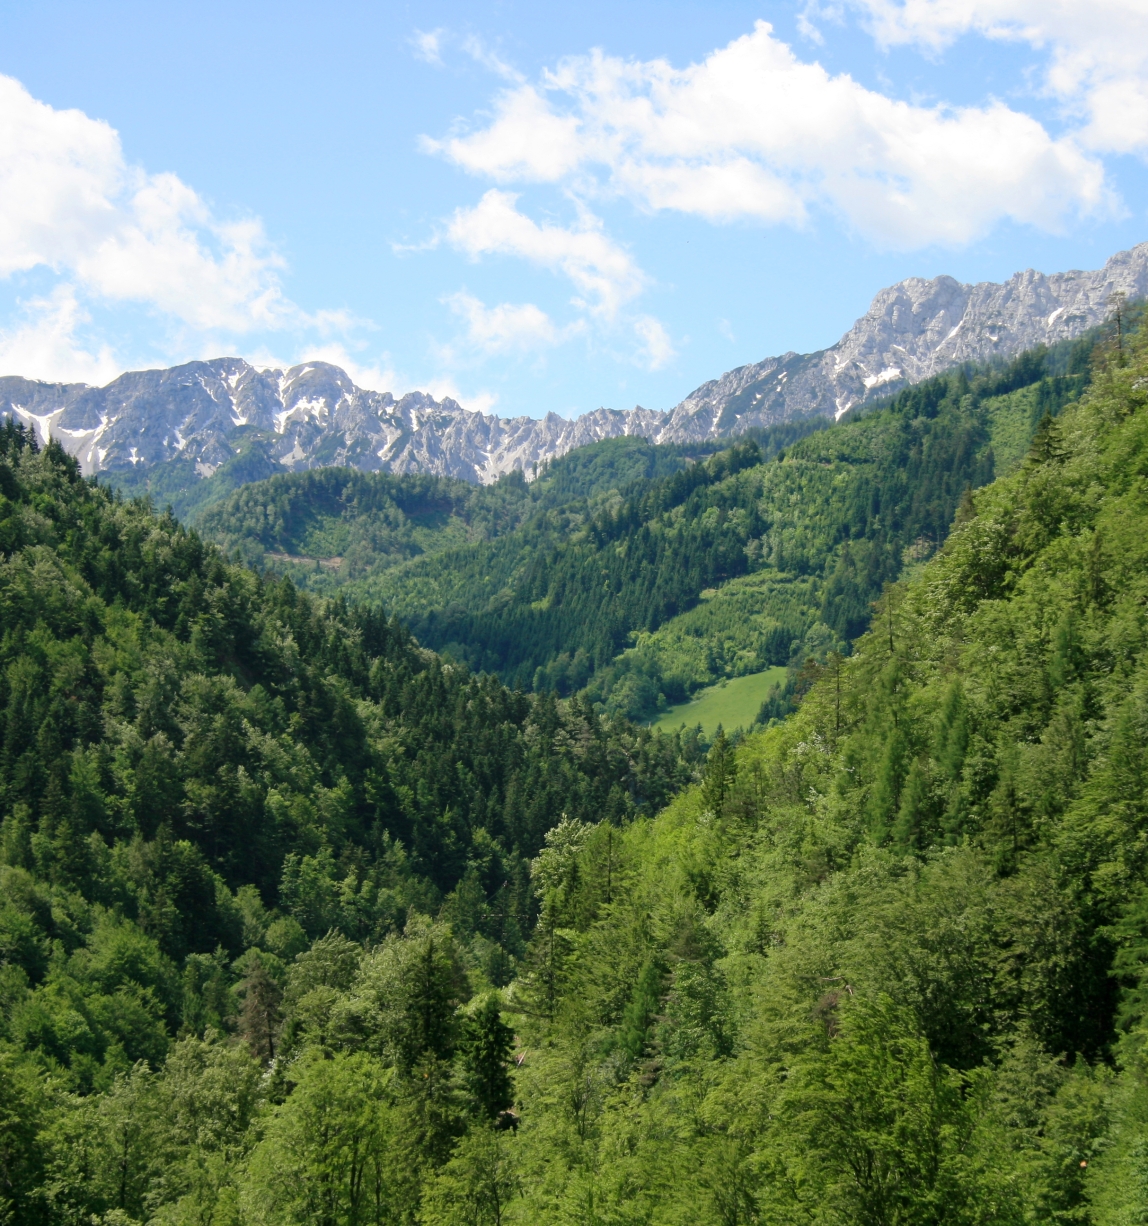 Forest in spring with mountainscape in background 